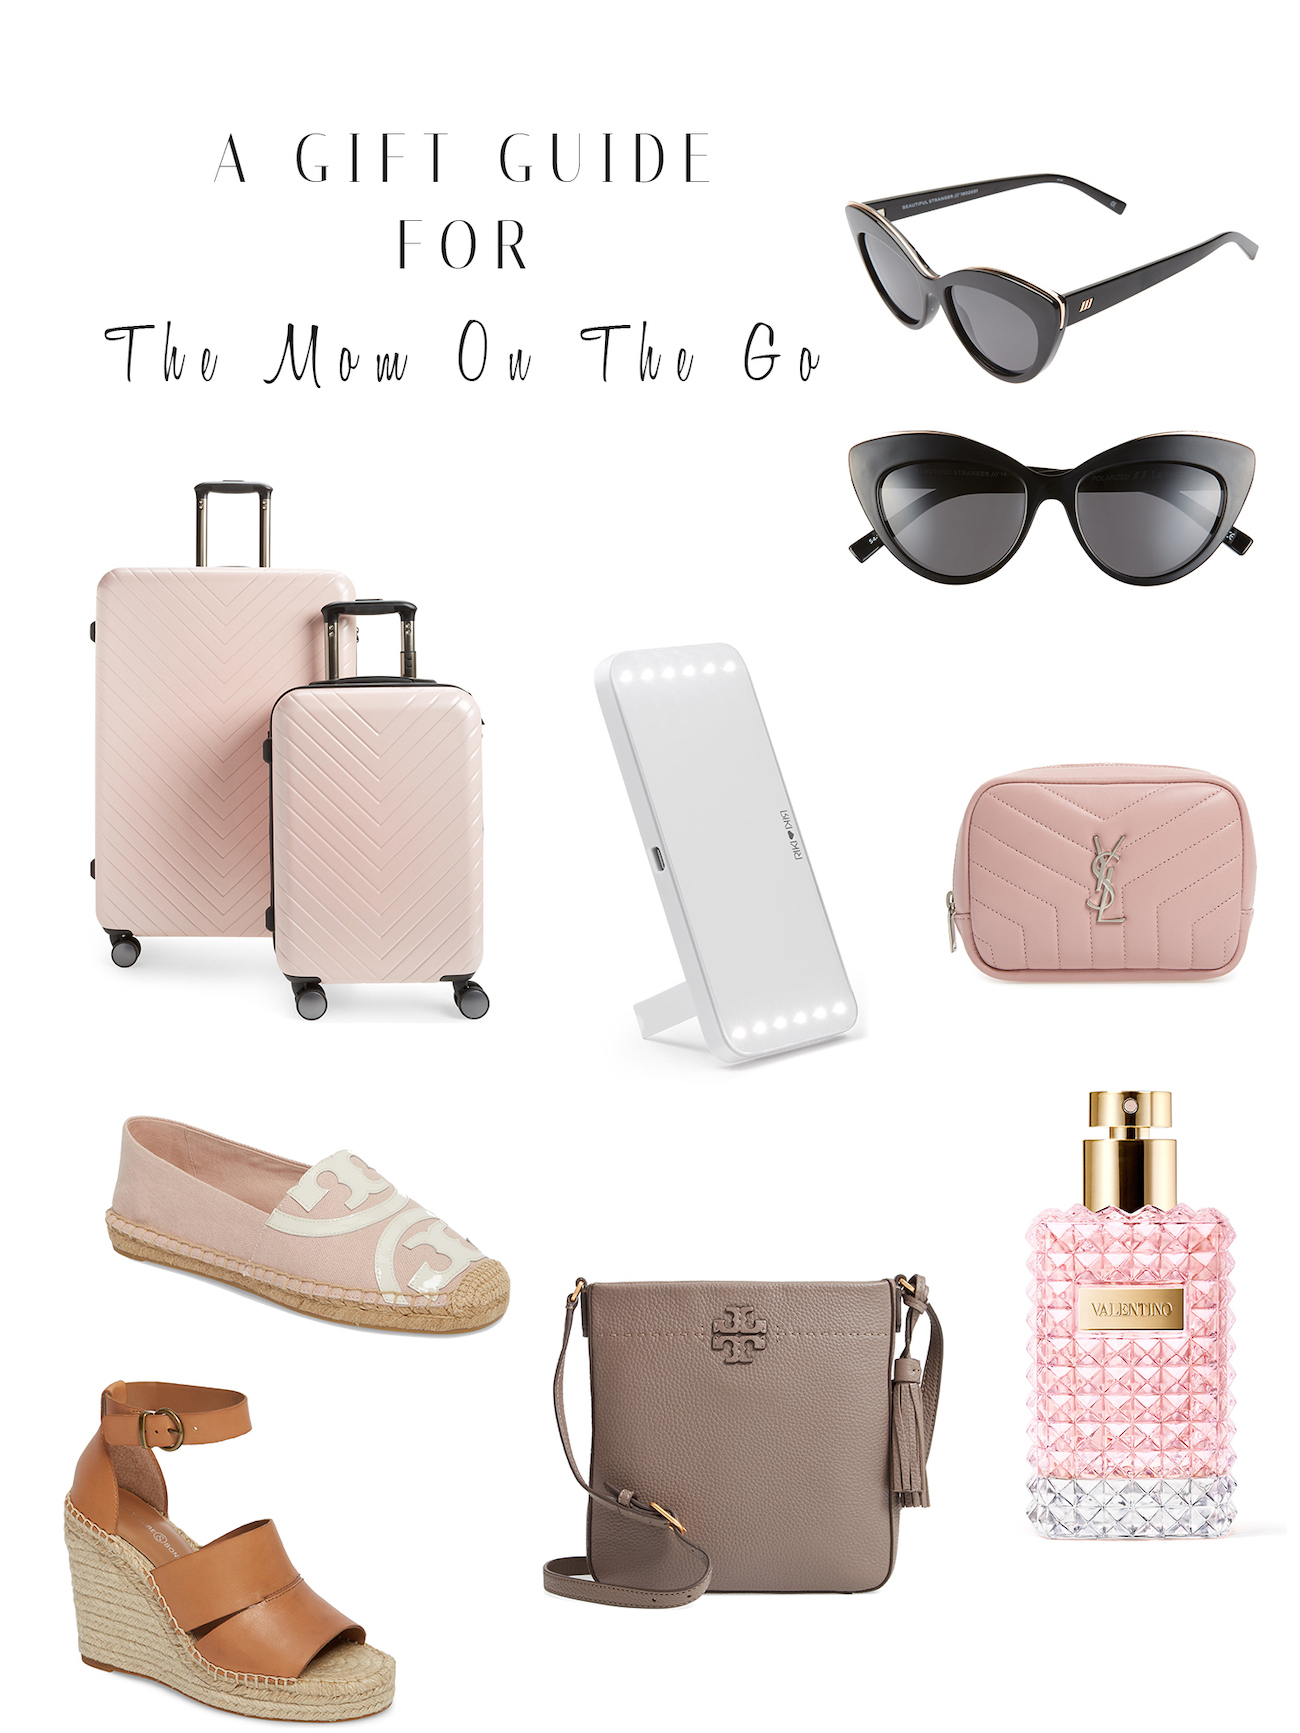 Mother's Day Gift Guide | Mom On The Go  | Blondie in the City by Hayley Larue